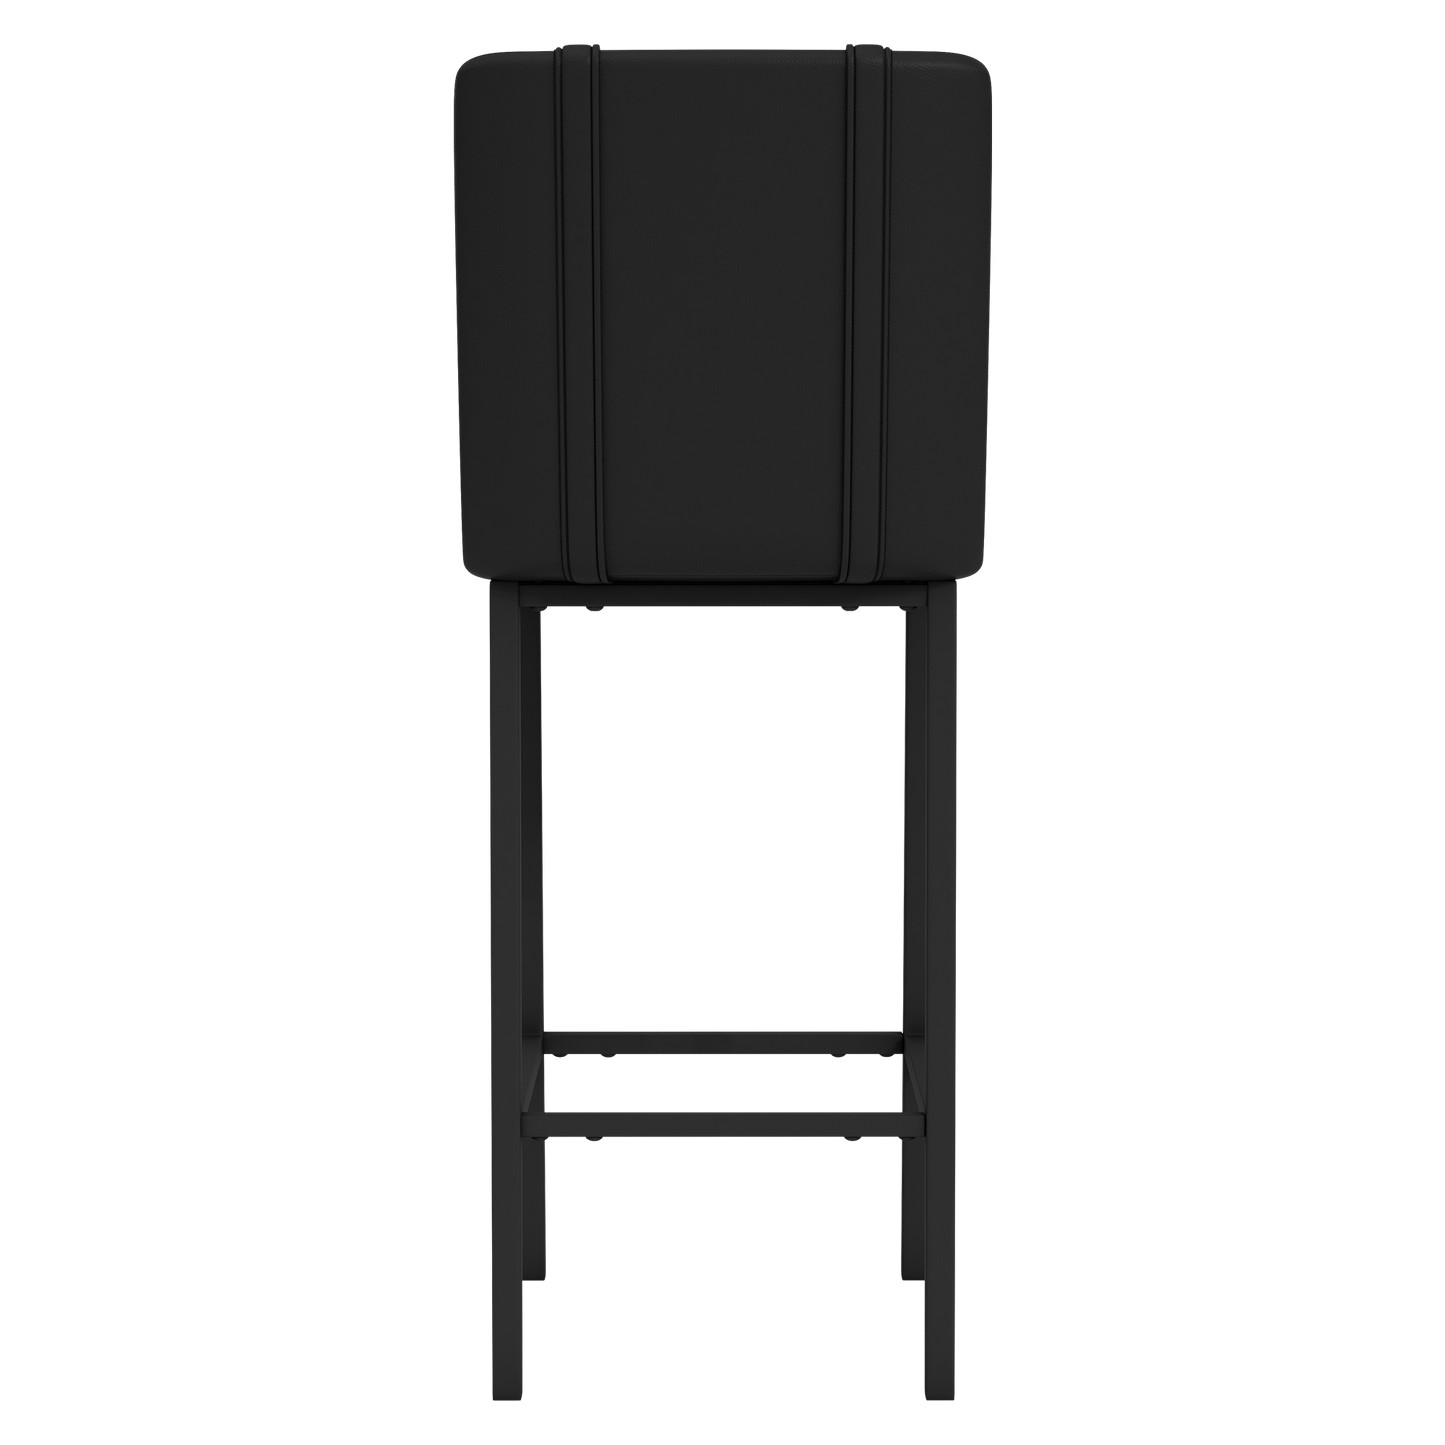 Bar Stool 500 with West Virginia Mountaineers Logo Set of 2